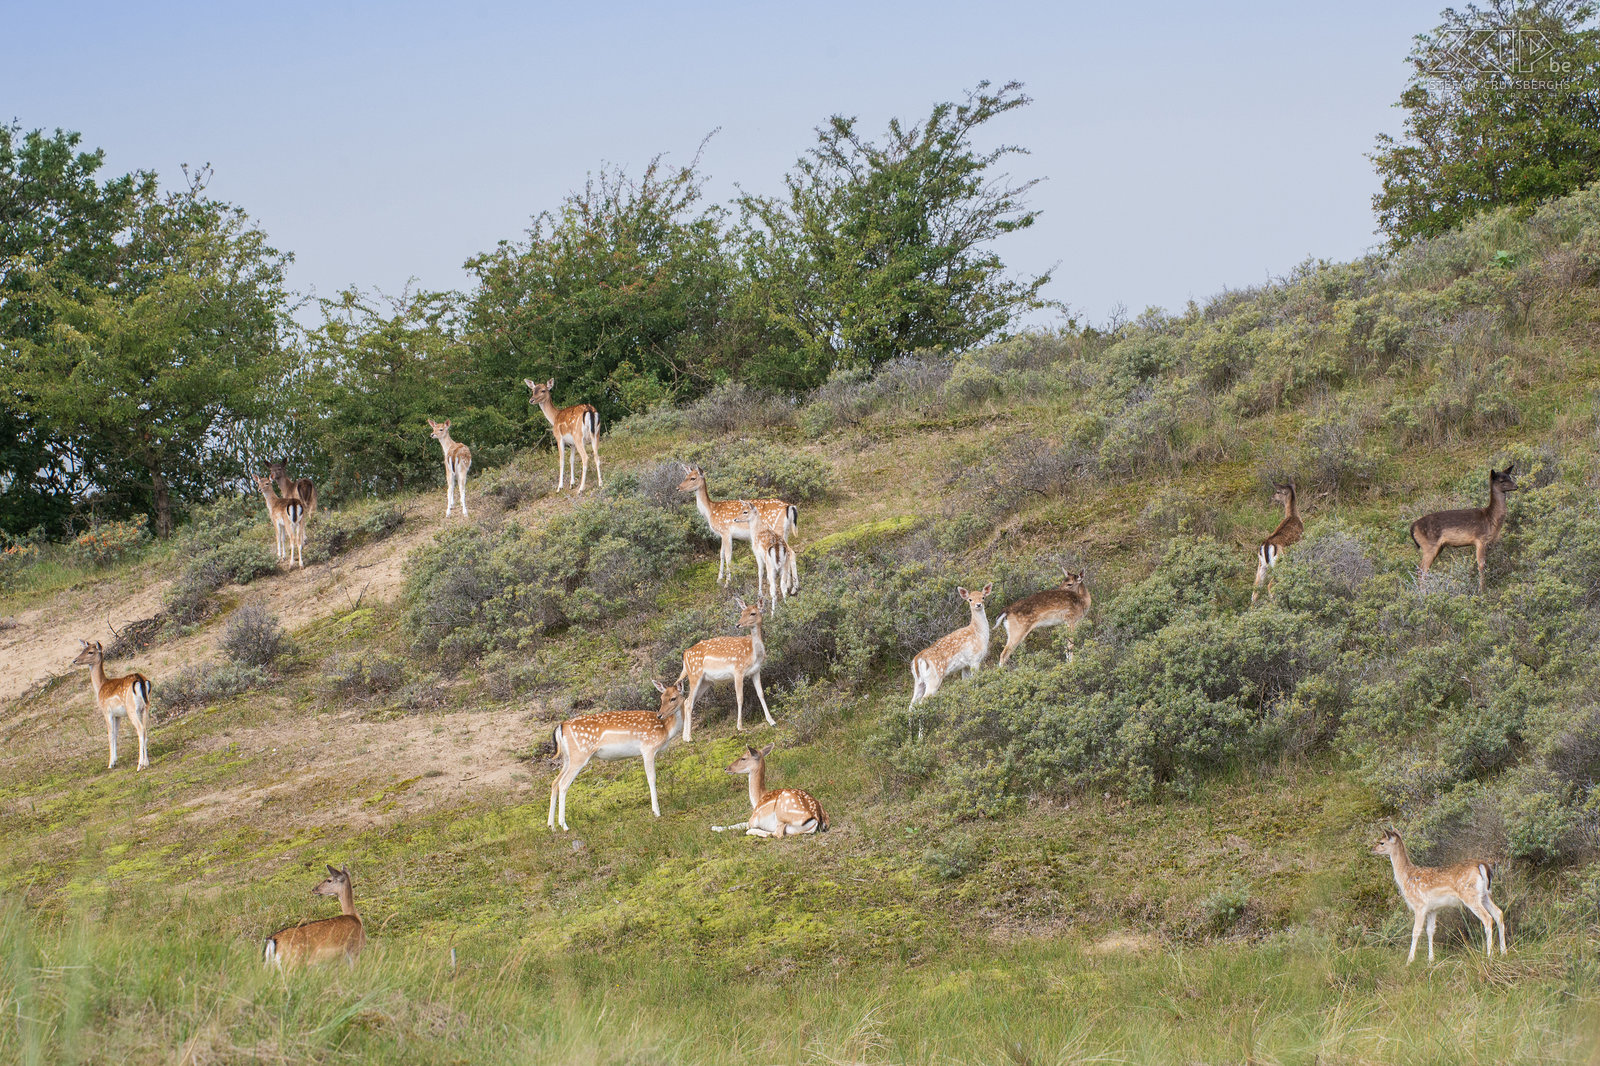 Amsterdamse Waterleidingduinen - Fallow deers The Amsterdamse Waterleidingduinen is a beautiful nature reserve in the province of North Holland in the Netherlands. It is a dune area with lots of water channels. It has the largest population of fallow deers in the Netherlands. It is estimated that there are 3000 fallow deers. There also foxes, some of them are used to people, roe deers and many birds. We also visted the neighboring Zuid-Kennemerland National Park. We were not able to spot the wisents (European bison) which were released in the Kraansvlak area in 2007. We saw a nice herd of Highland cattle. Stefan Cruysberghs